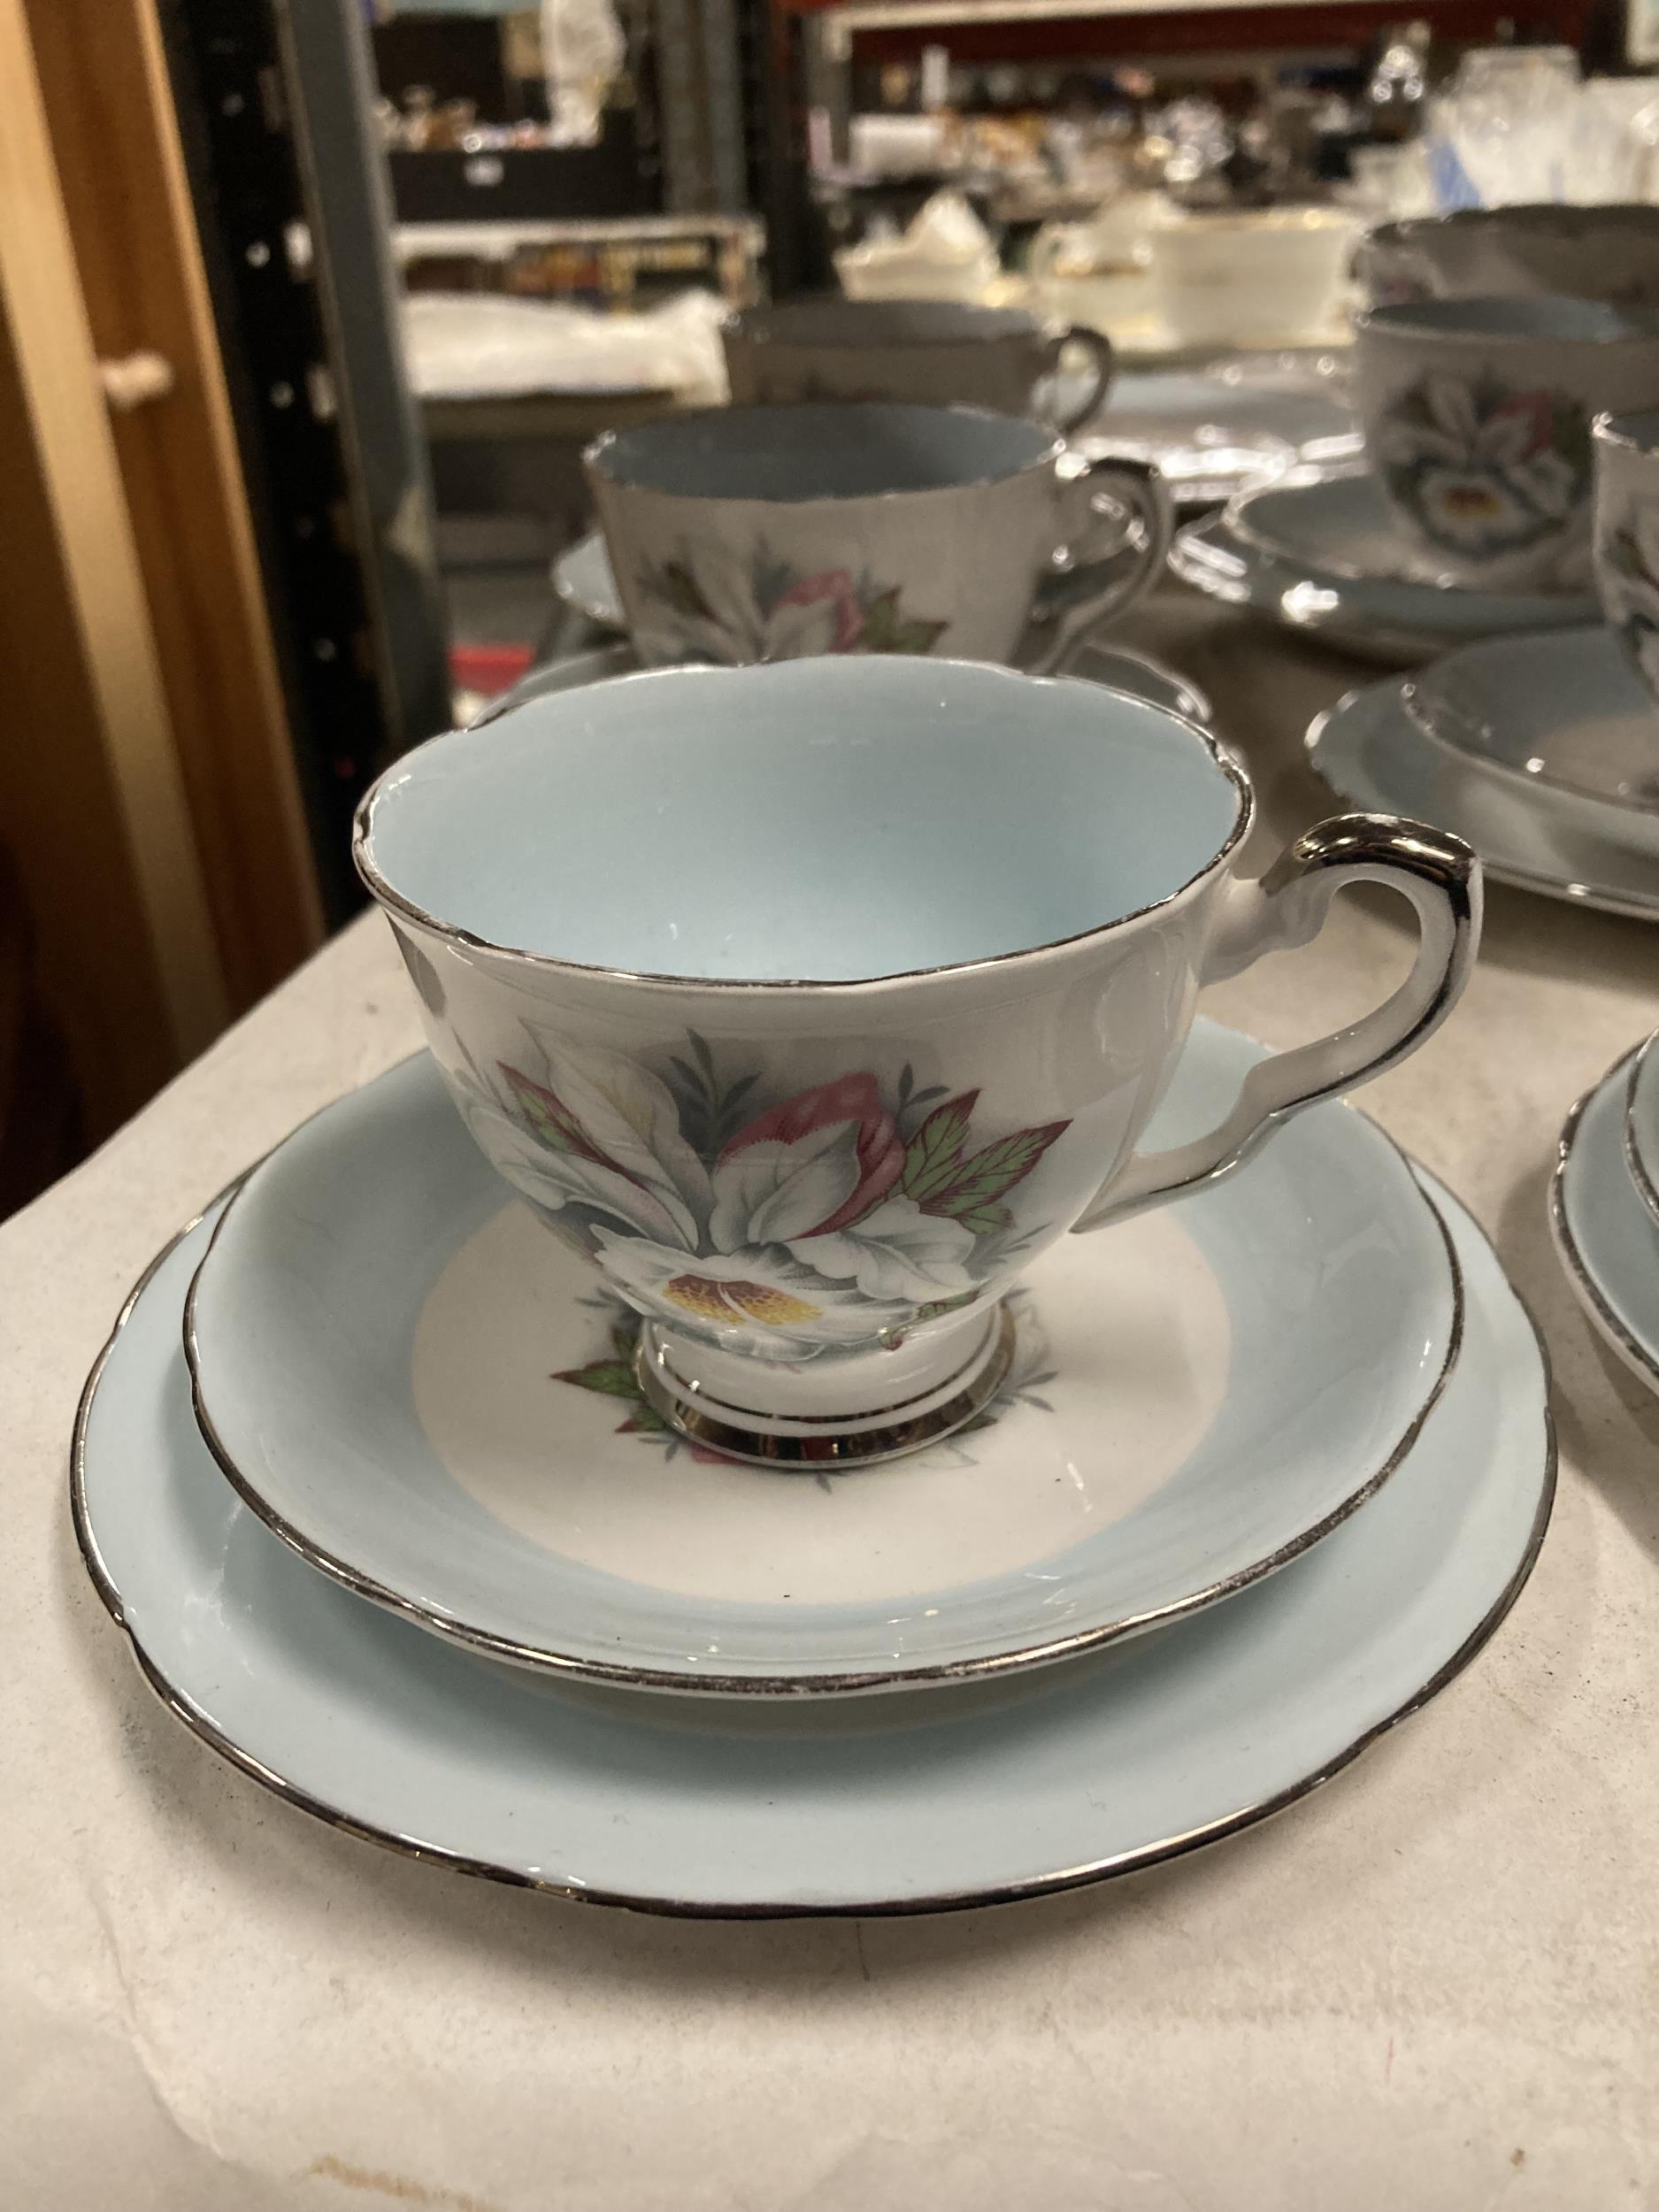 A ROYAL STAFFORD 'WHITE LADY' TEASET TO INCLUDE A CAKE PLATE, CUPS, SAUCERS, SIDE PLATES, CREAM - Image 2 of 4